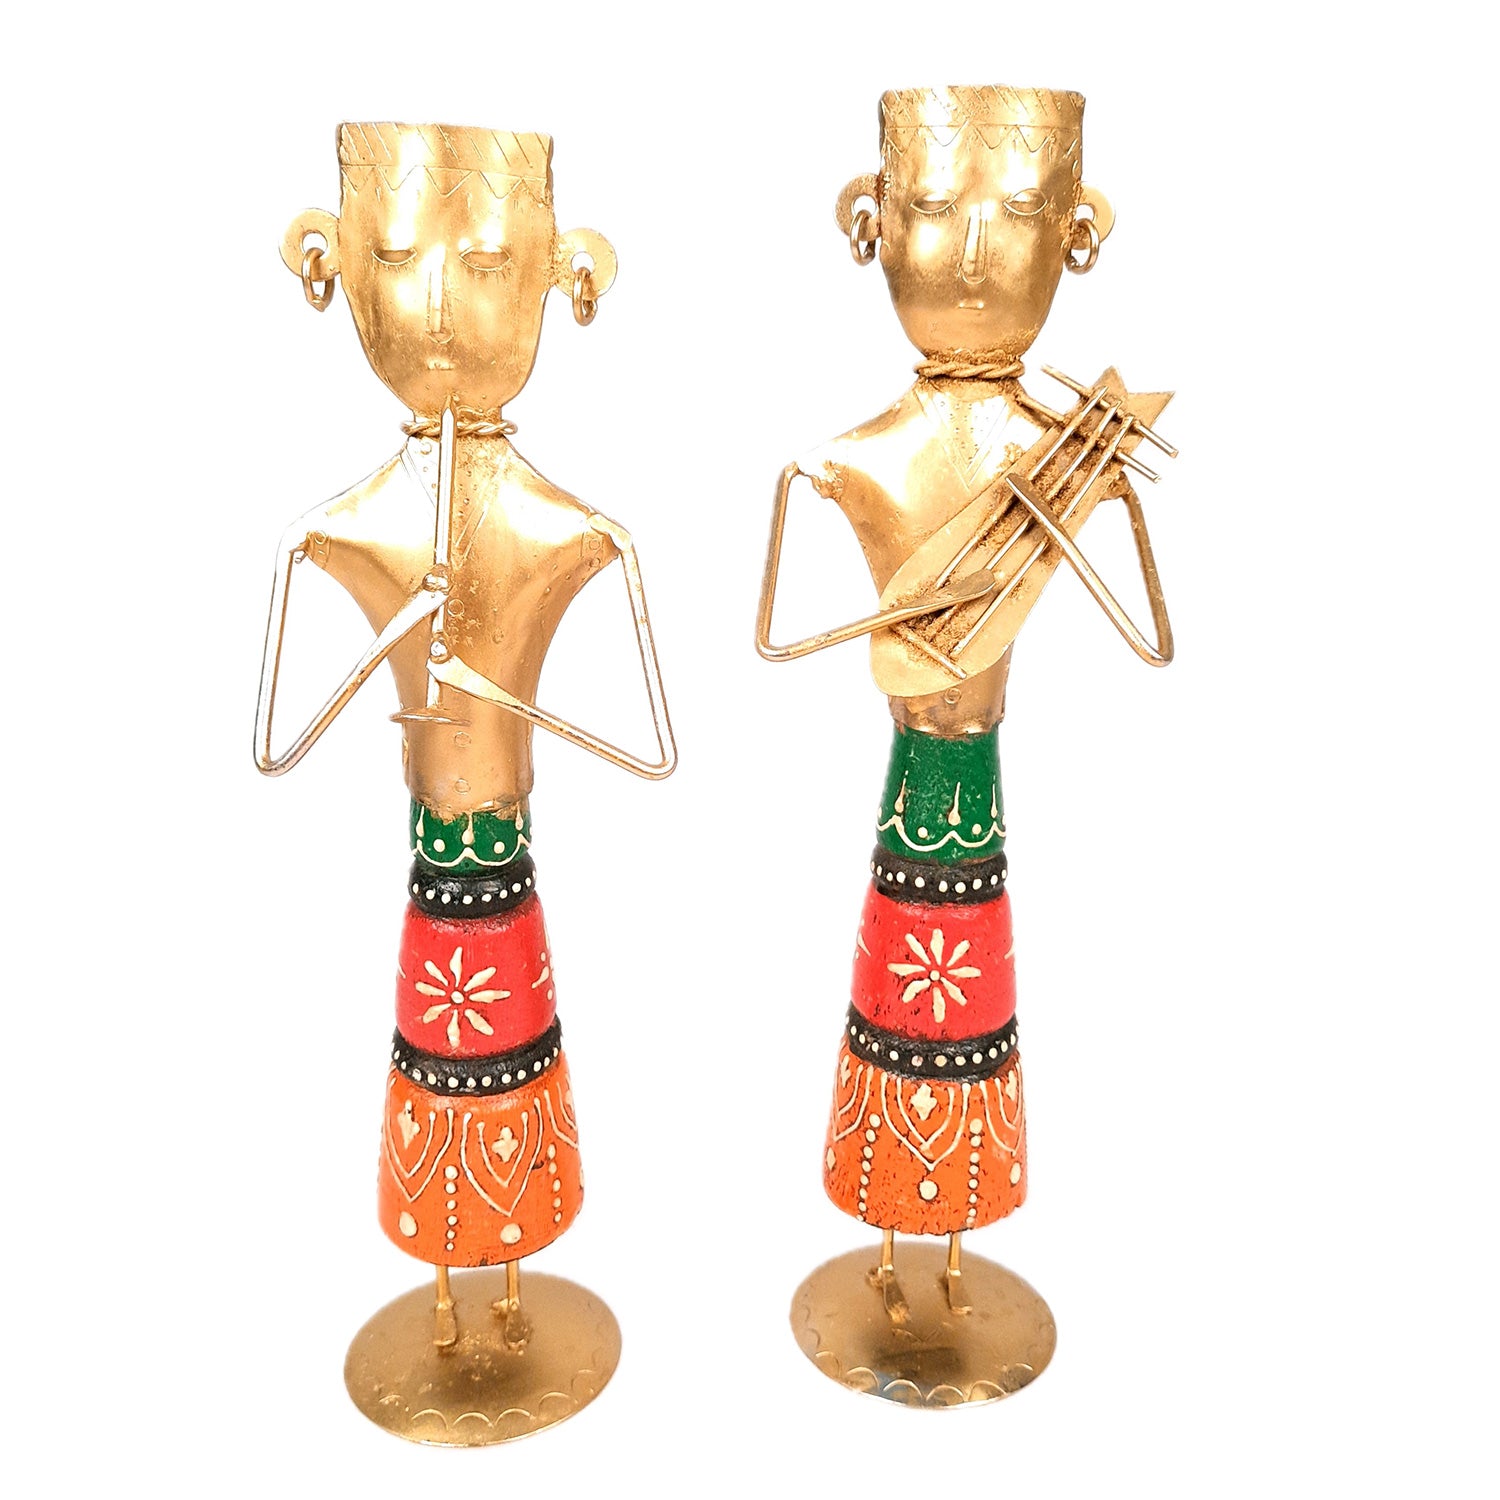 Tribal Musicians Figurines - for Home, Bedroom, Living Room, Office Desk, Table Decor & Gifts - 12 Inch (Set of 2)